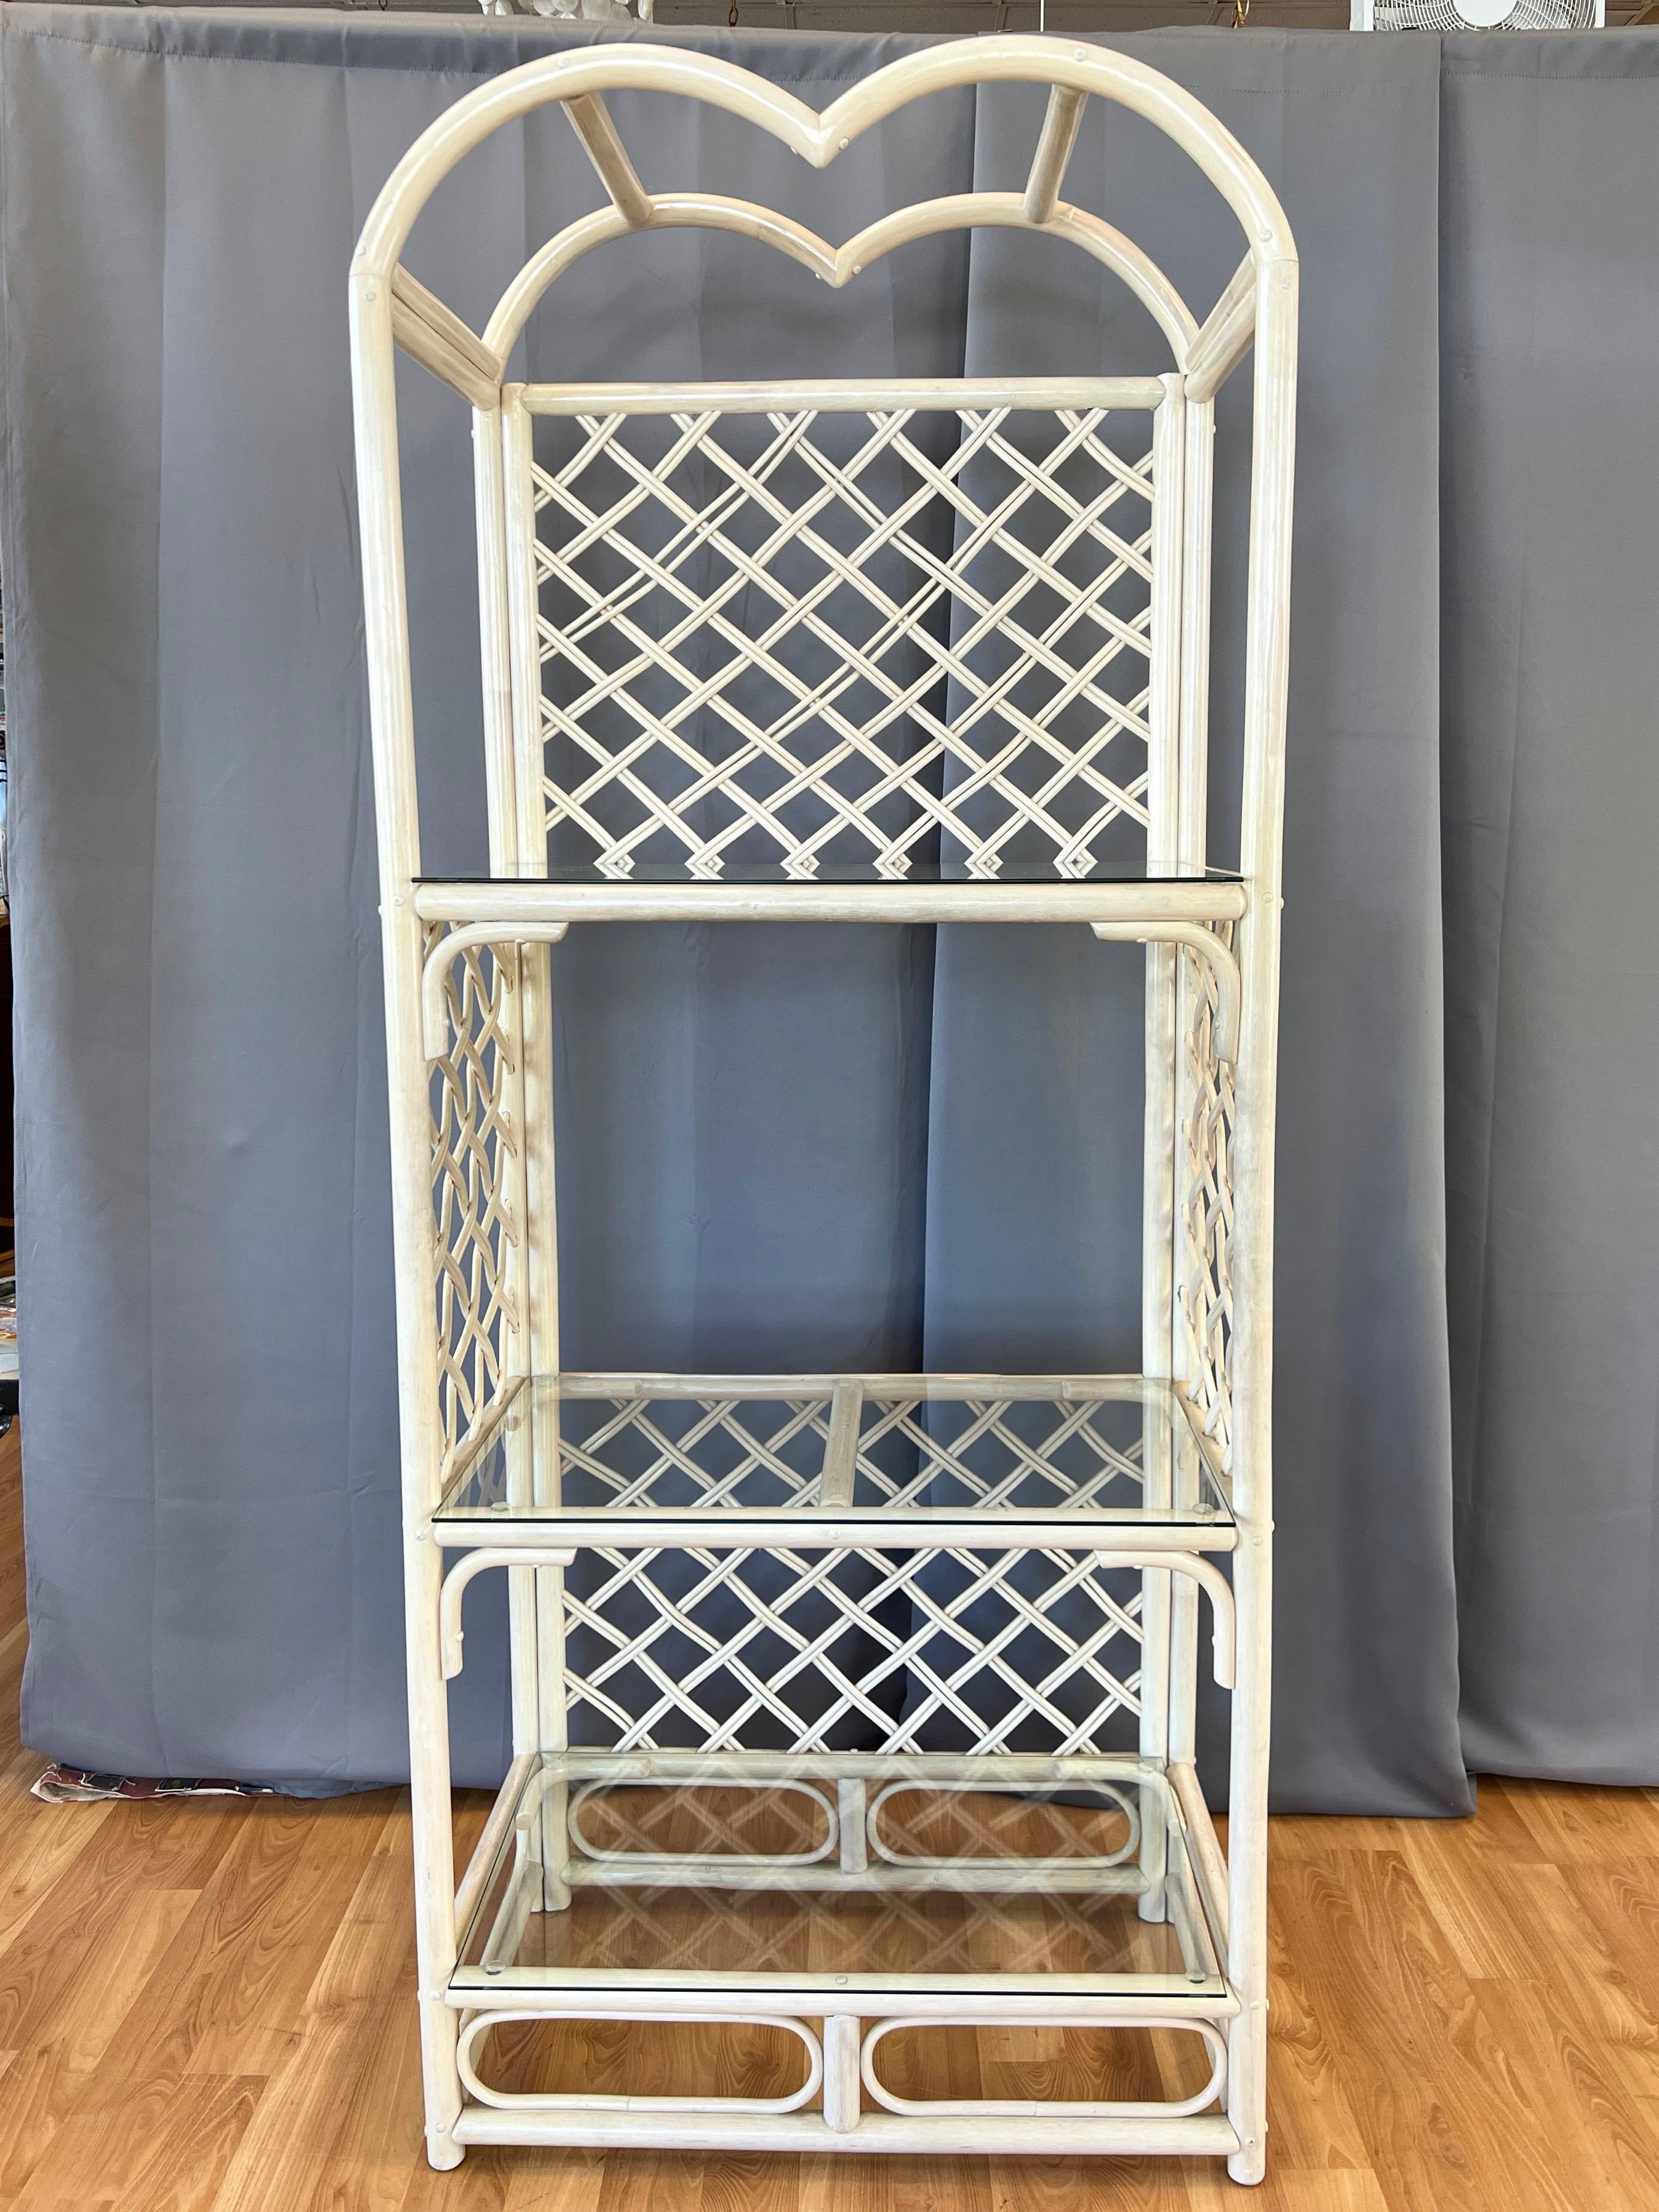 A tall and spacious late 1970s or early 1980s McGuire-style bent rattan étagère or shelving unit with three glass shelves.

Striking and uncommon double-arched heart-shaped top with various bent rattan elements and woven lattice panels at the back